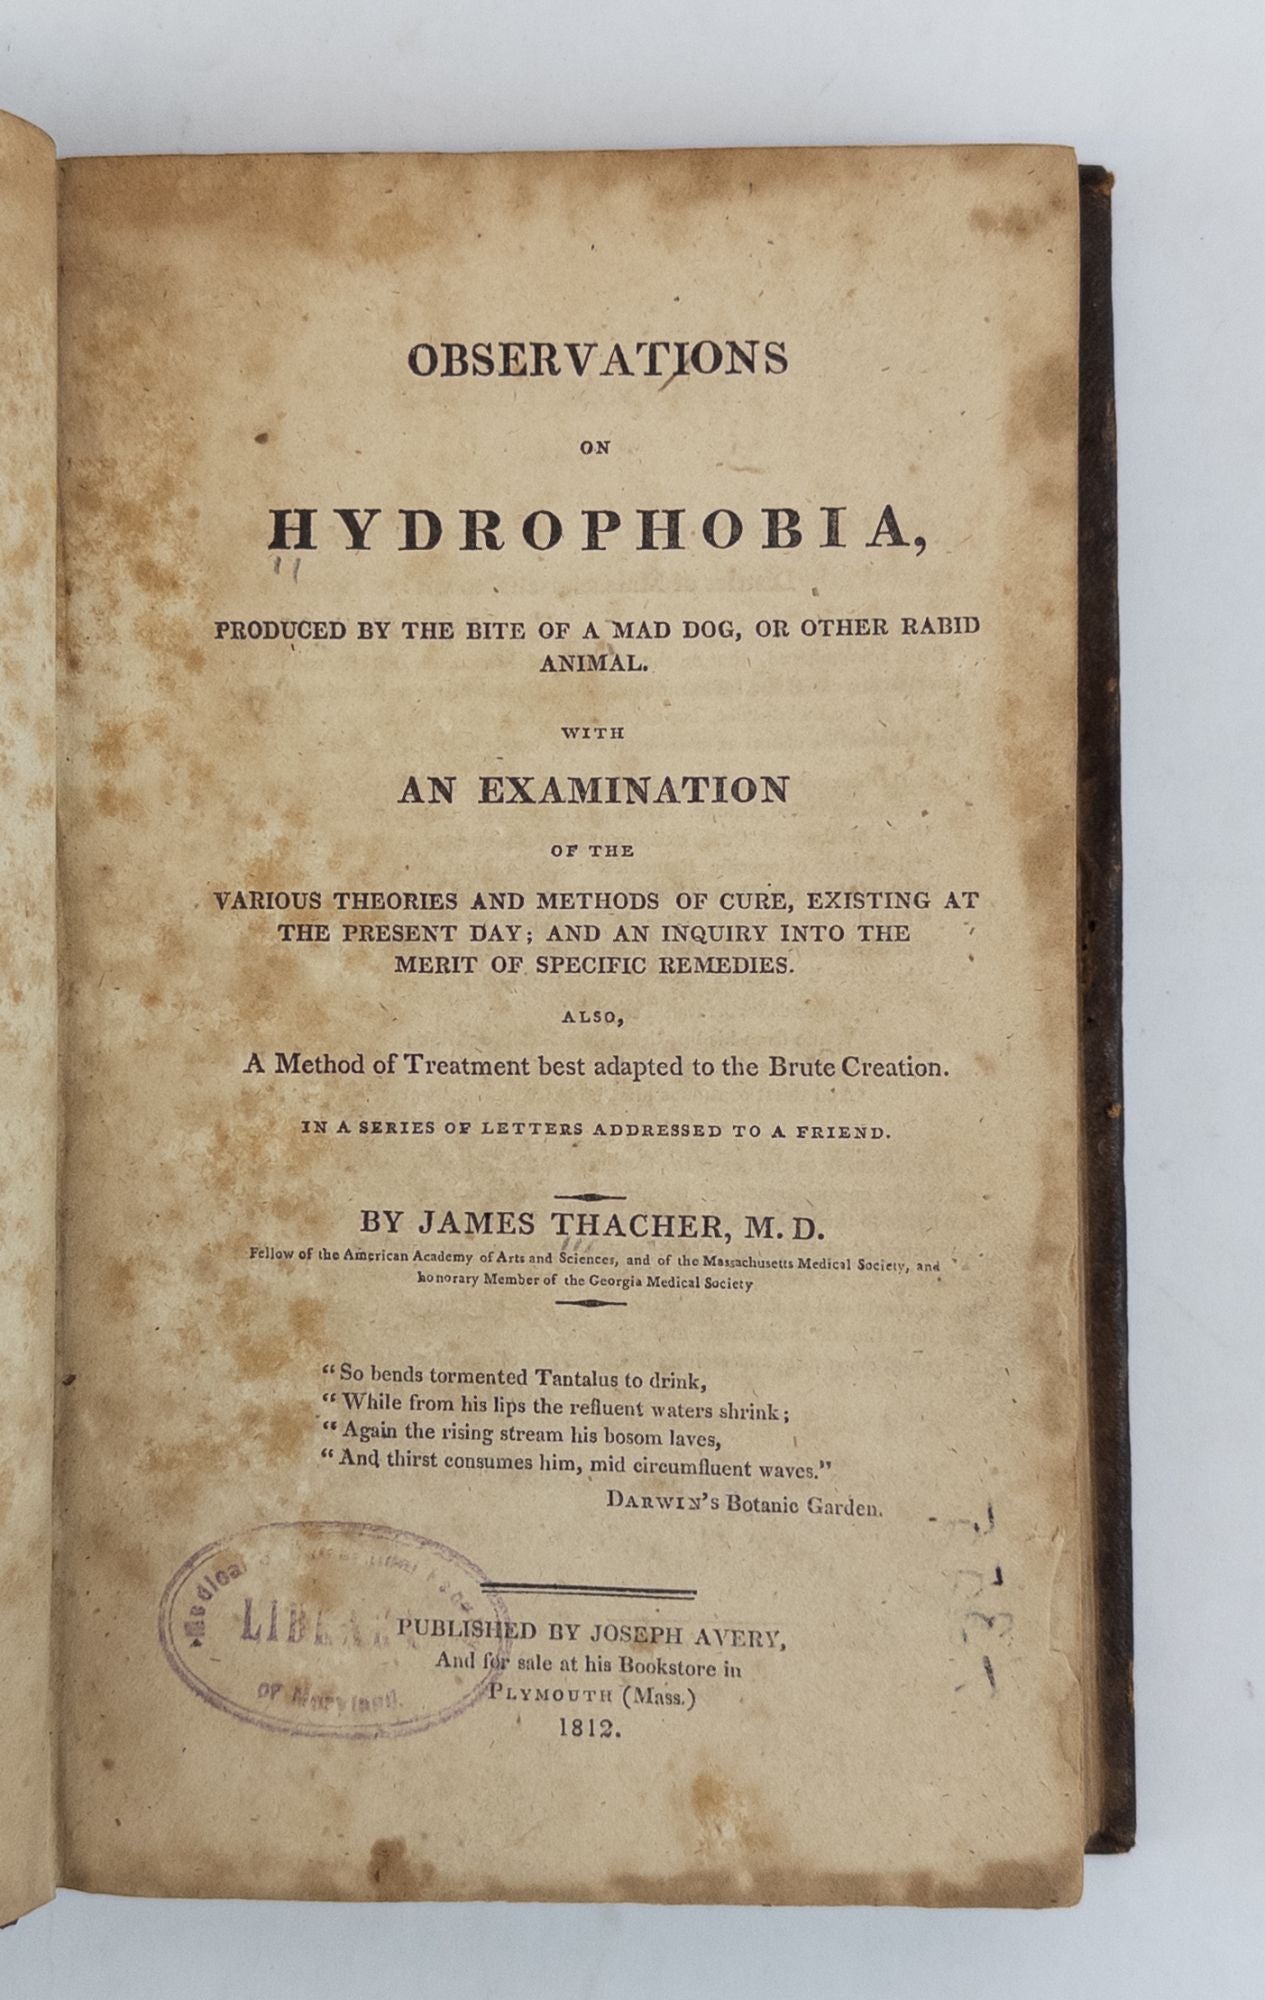 Product Image for OBSERVATIONS ON HYDROPHOBIA, PRODUCED BY THE BITE OF A MAD DOG, OR OTHER RABID ANIMAL